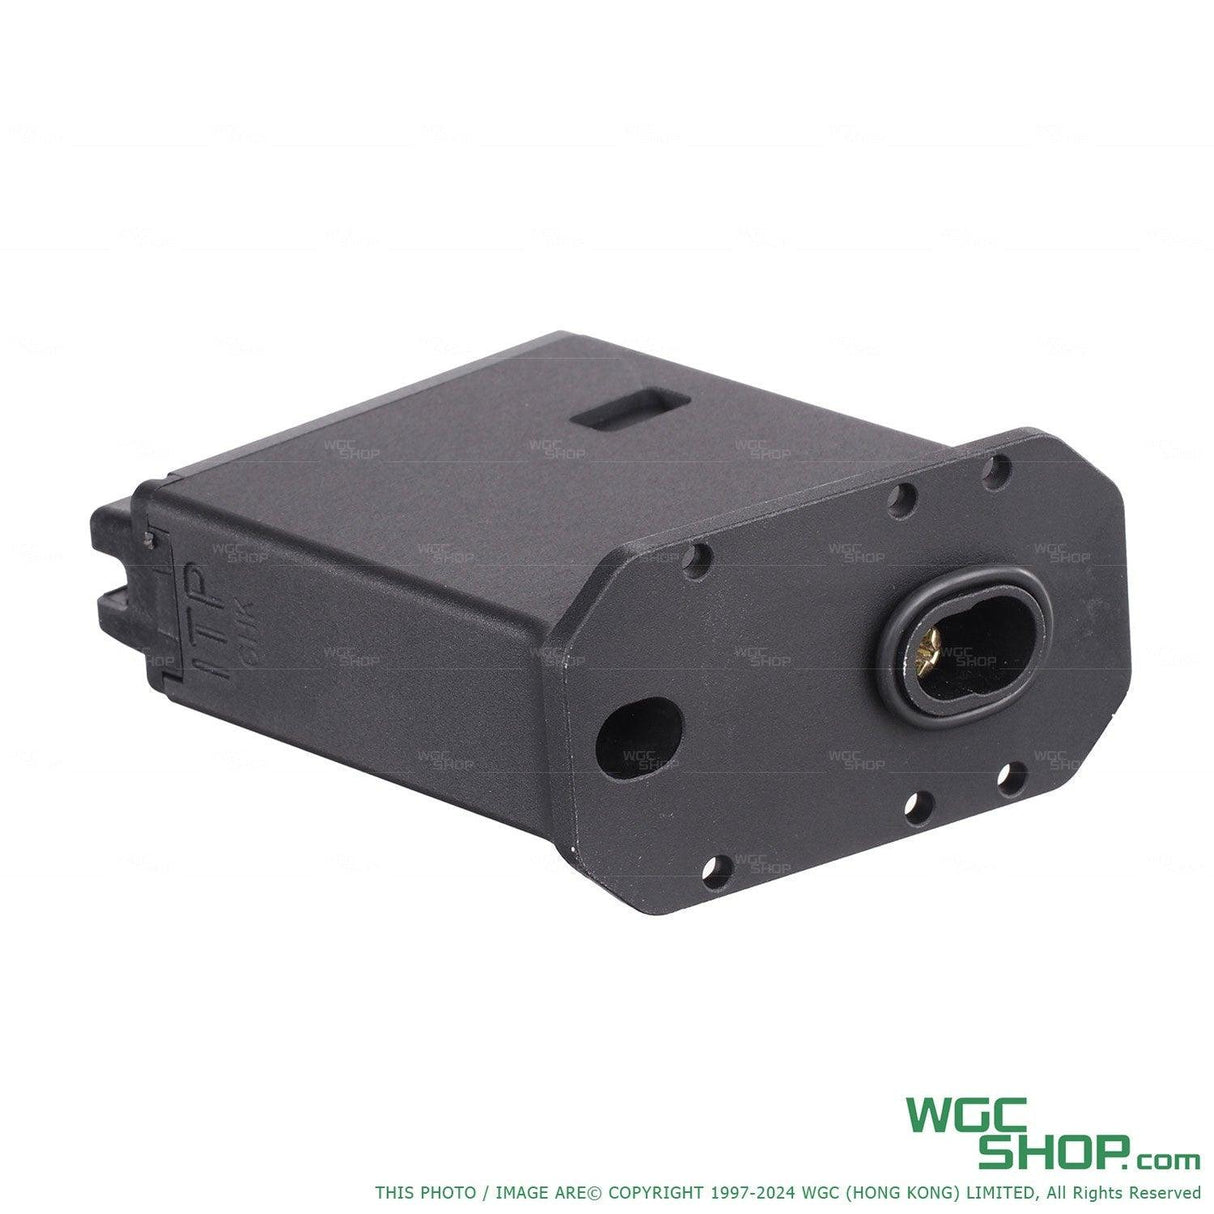 ITP AW / WE GBB Drum Magazine Adapter for GHK AR / M4 GBB Airsoft - WGC Shop